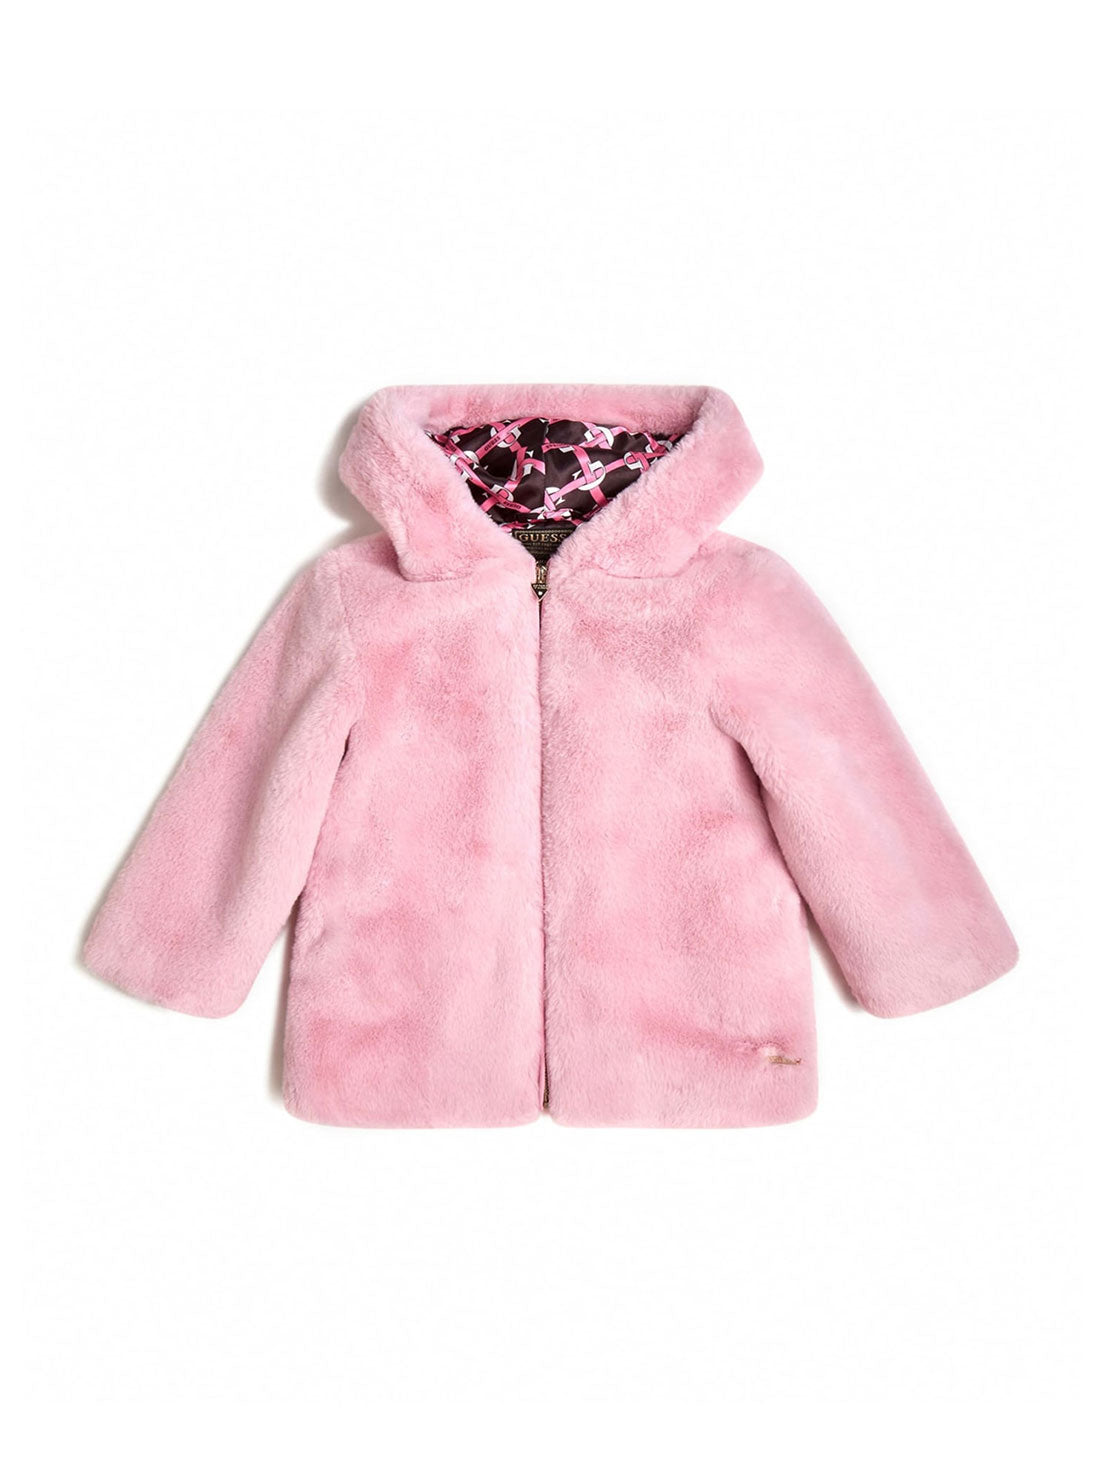 GUESS Little Girl Eco Taffy Rose Faux Fur Jacket (2-7) K2BL02WCFX0 Front View